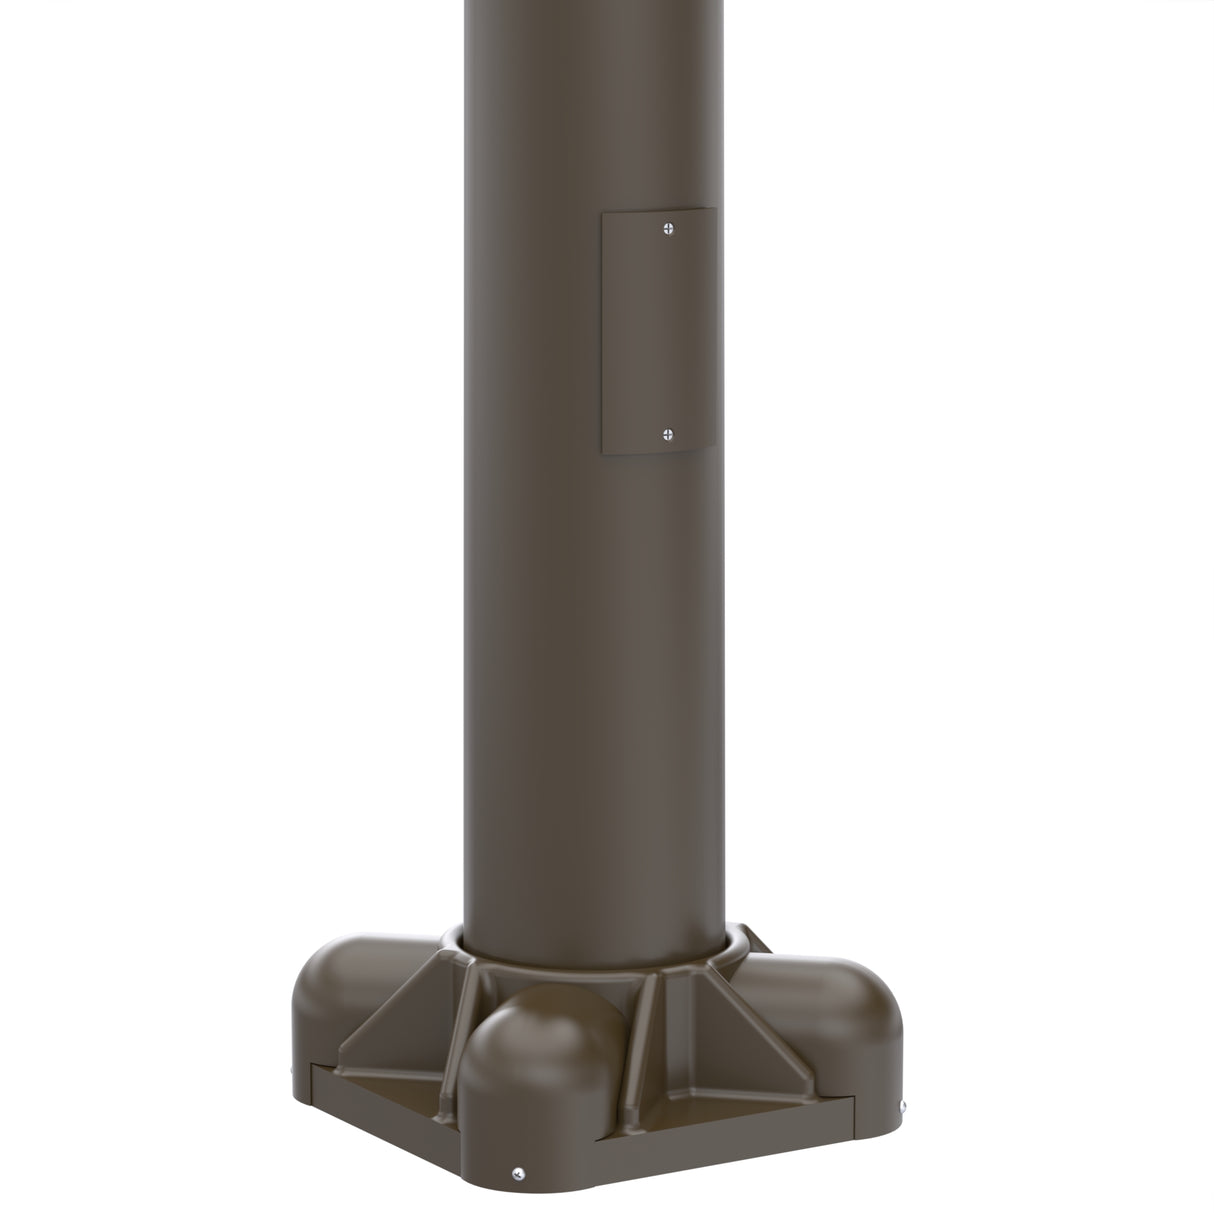 12' Tall x 5.0" Base OD x 3.0" Top OD x 0.188" Thick, Round Tapered Aluminum, Anchor Base Light Pole